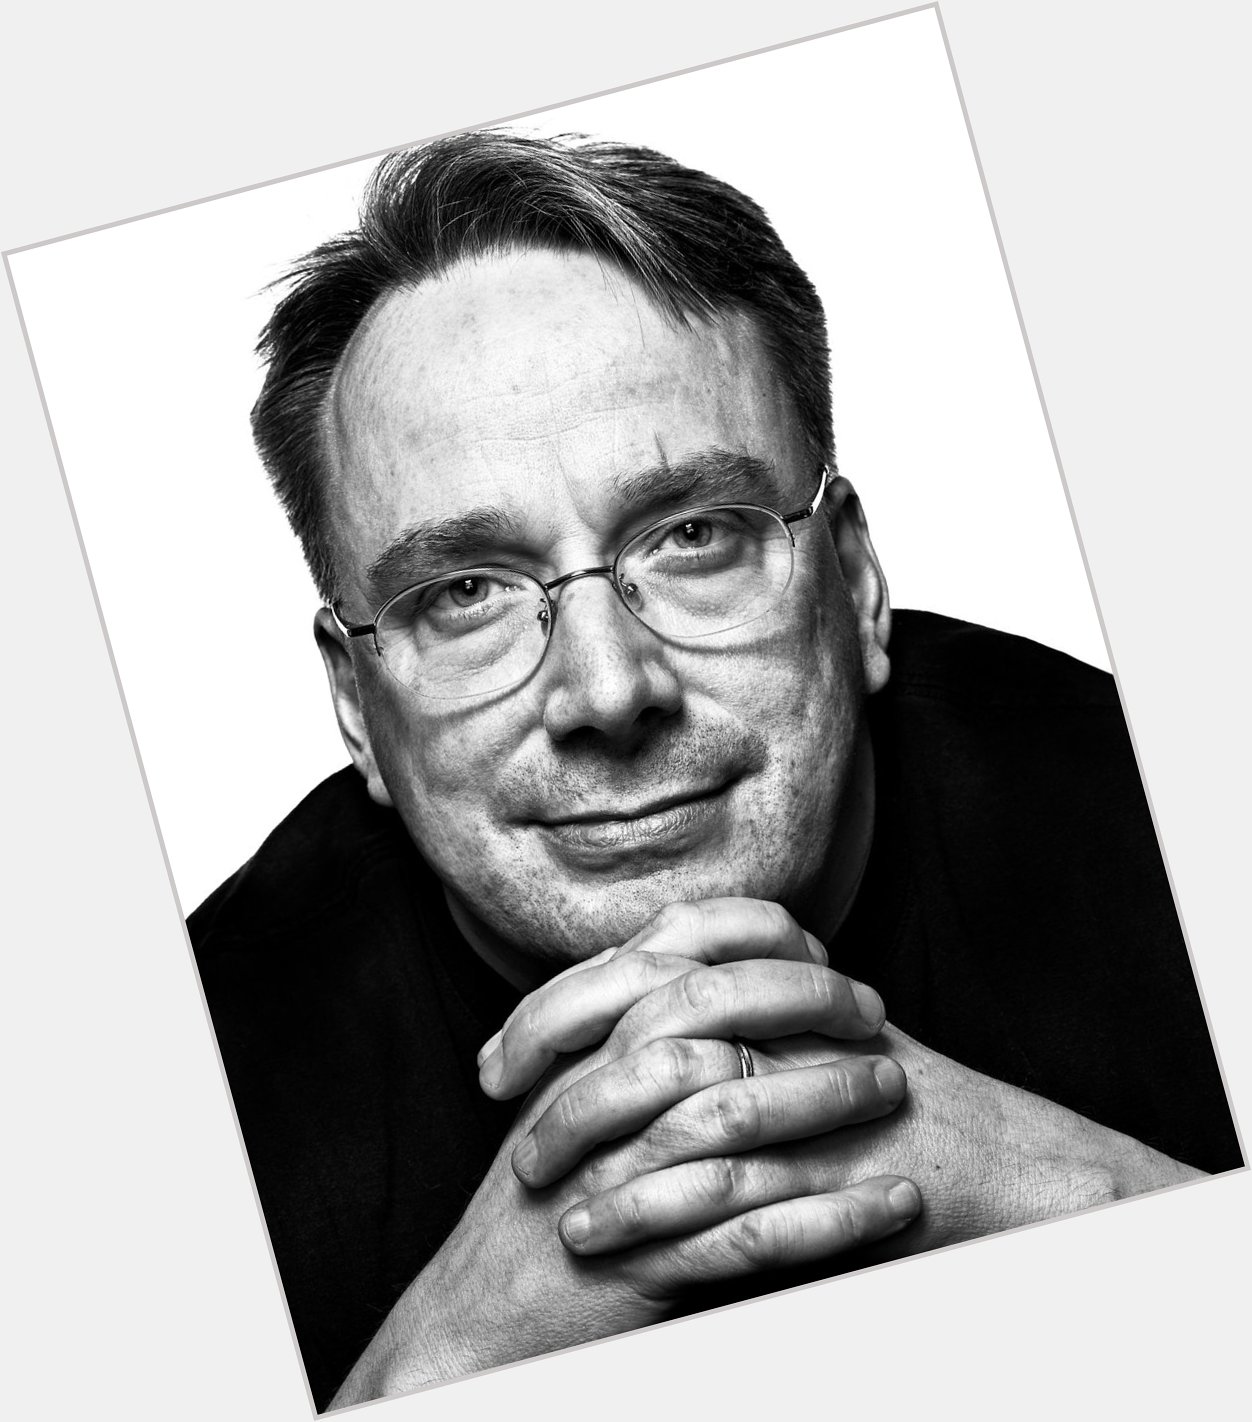 Happy 48th birthday to Linus Torvalds, the father of 